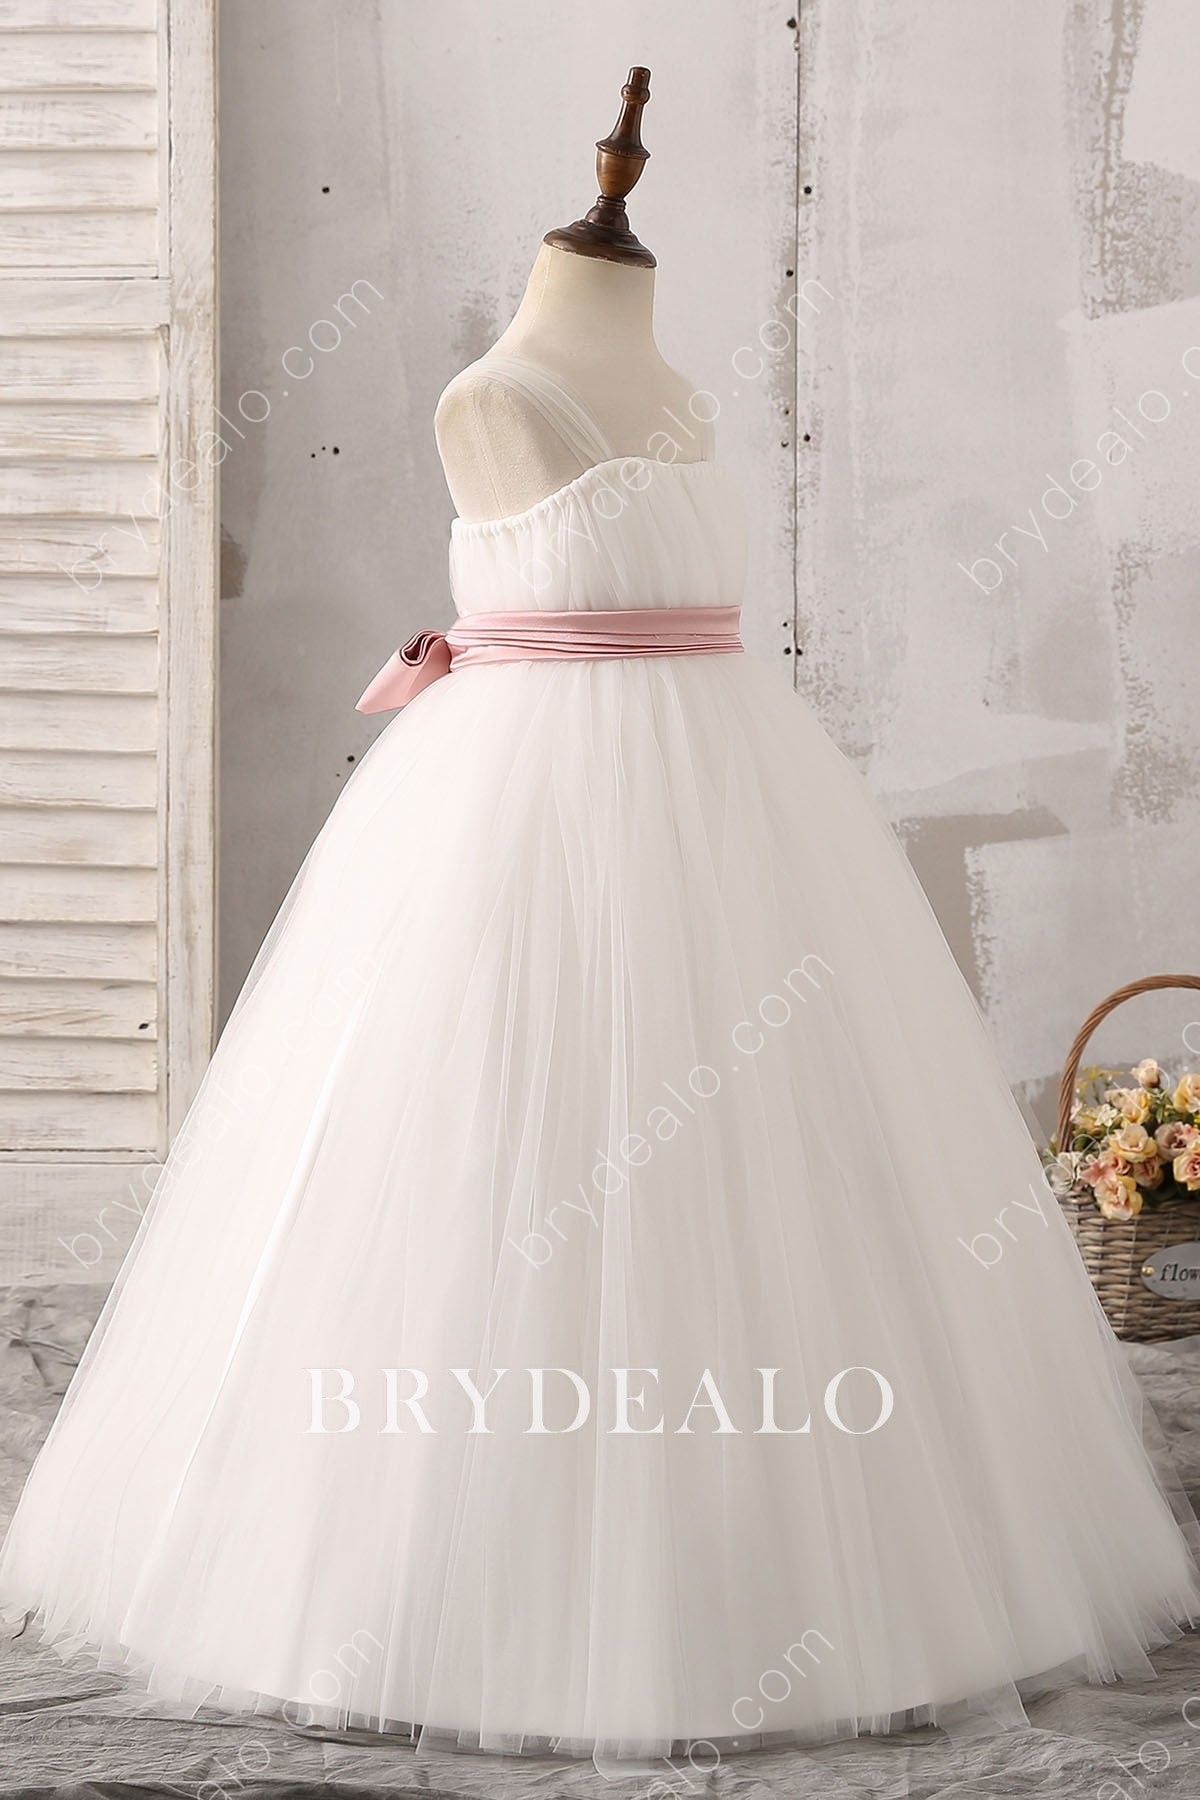 Sleeveless Tulle Flower Girl Ball Gown with Pink Bow